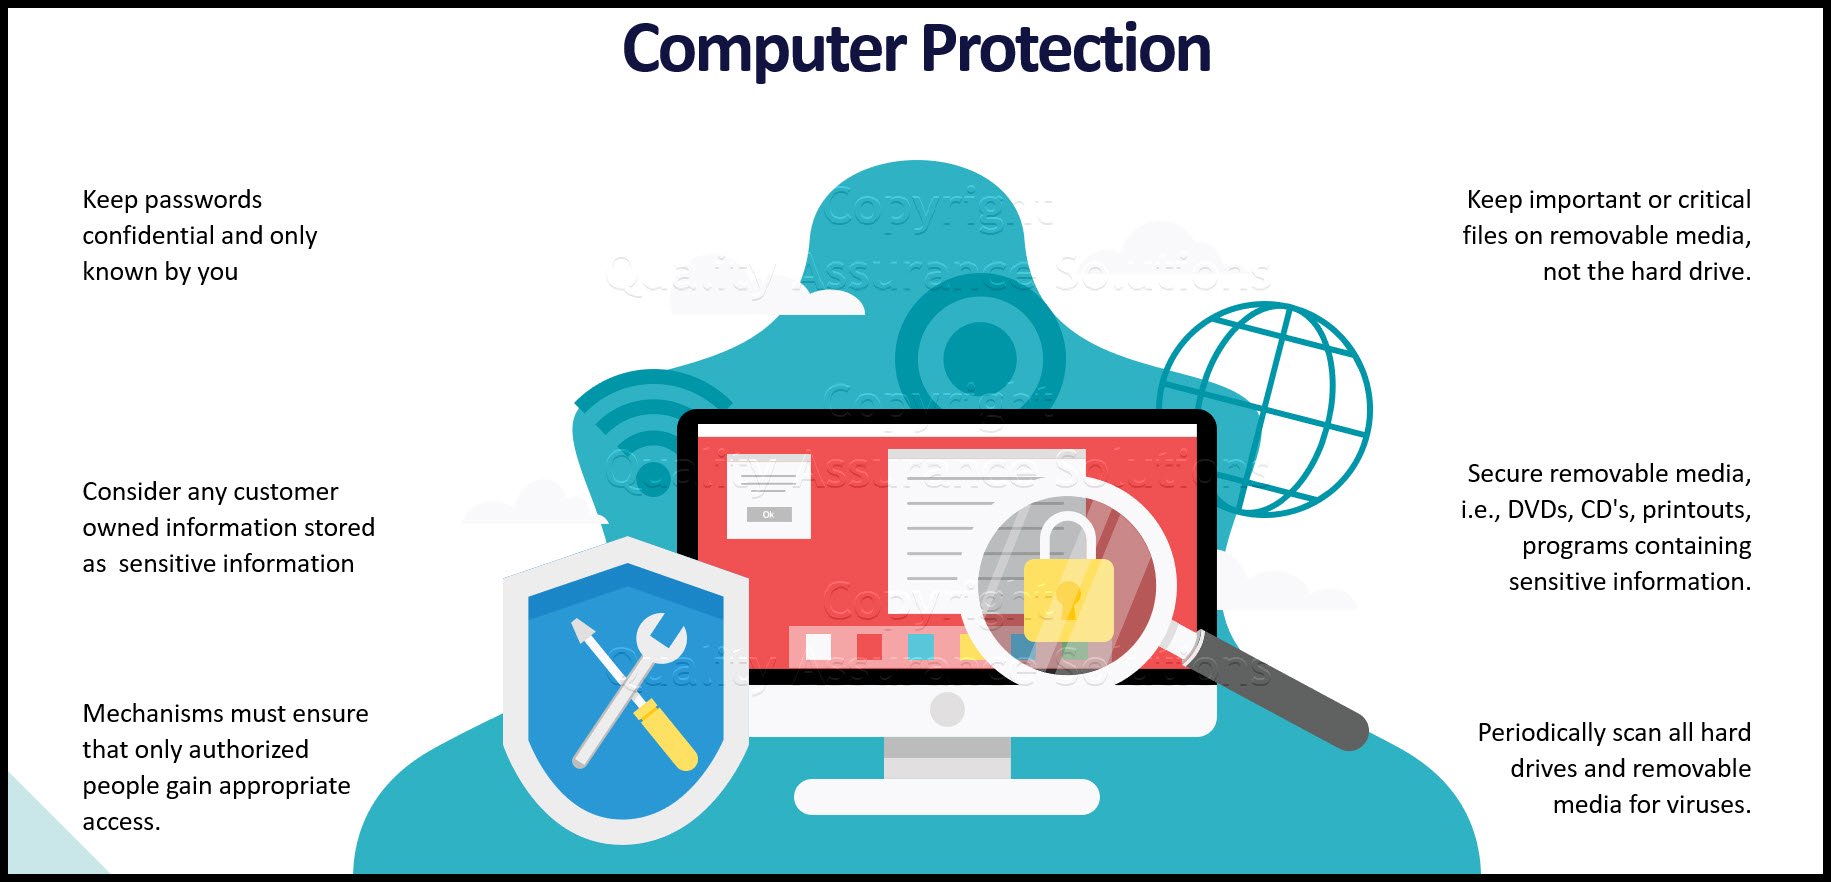 This article provides guidelines for creating a computer protection security policy at your workplace. It covers general principles, passwords, copyrights, licensing, protection, prevention, and security